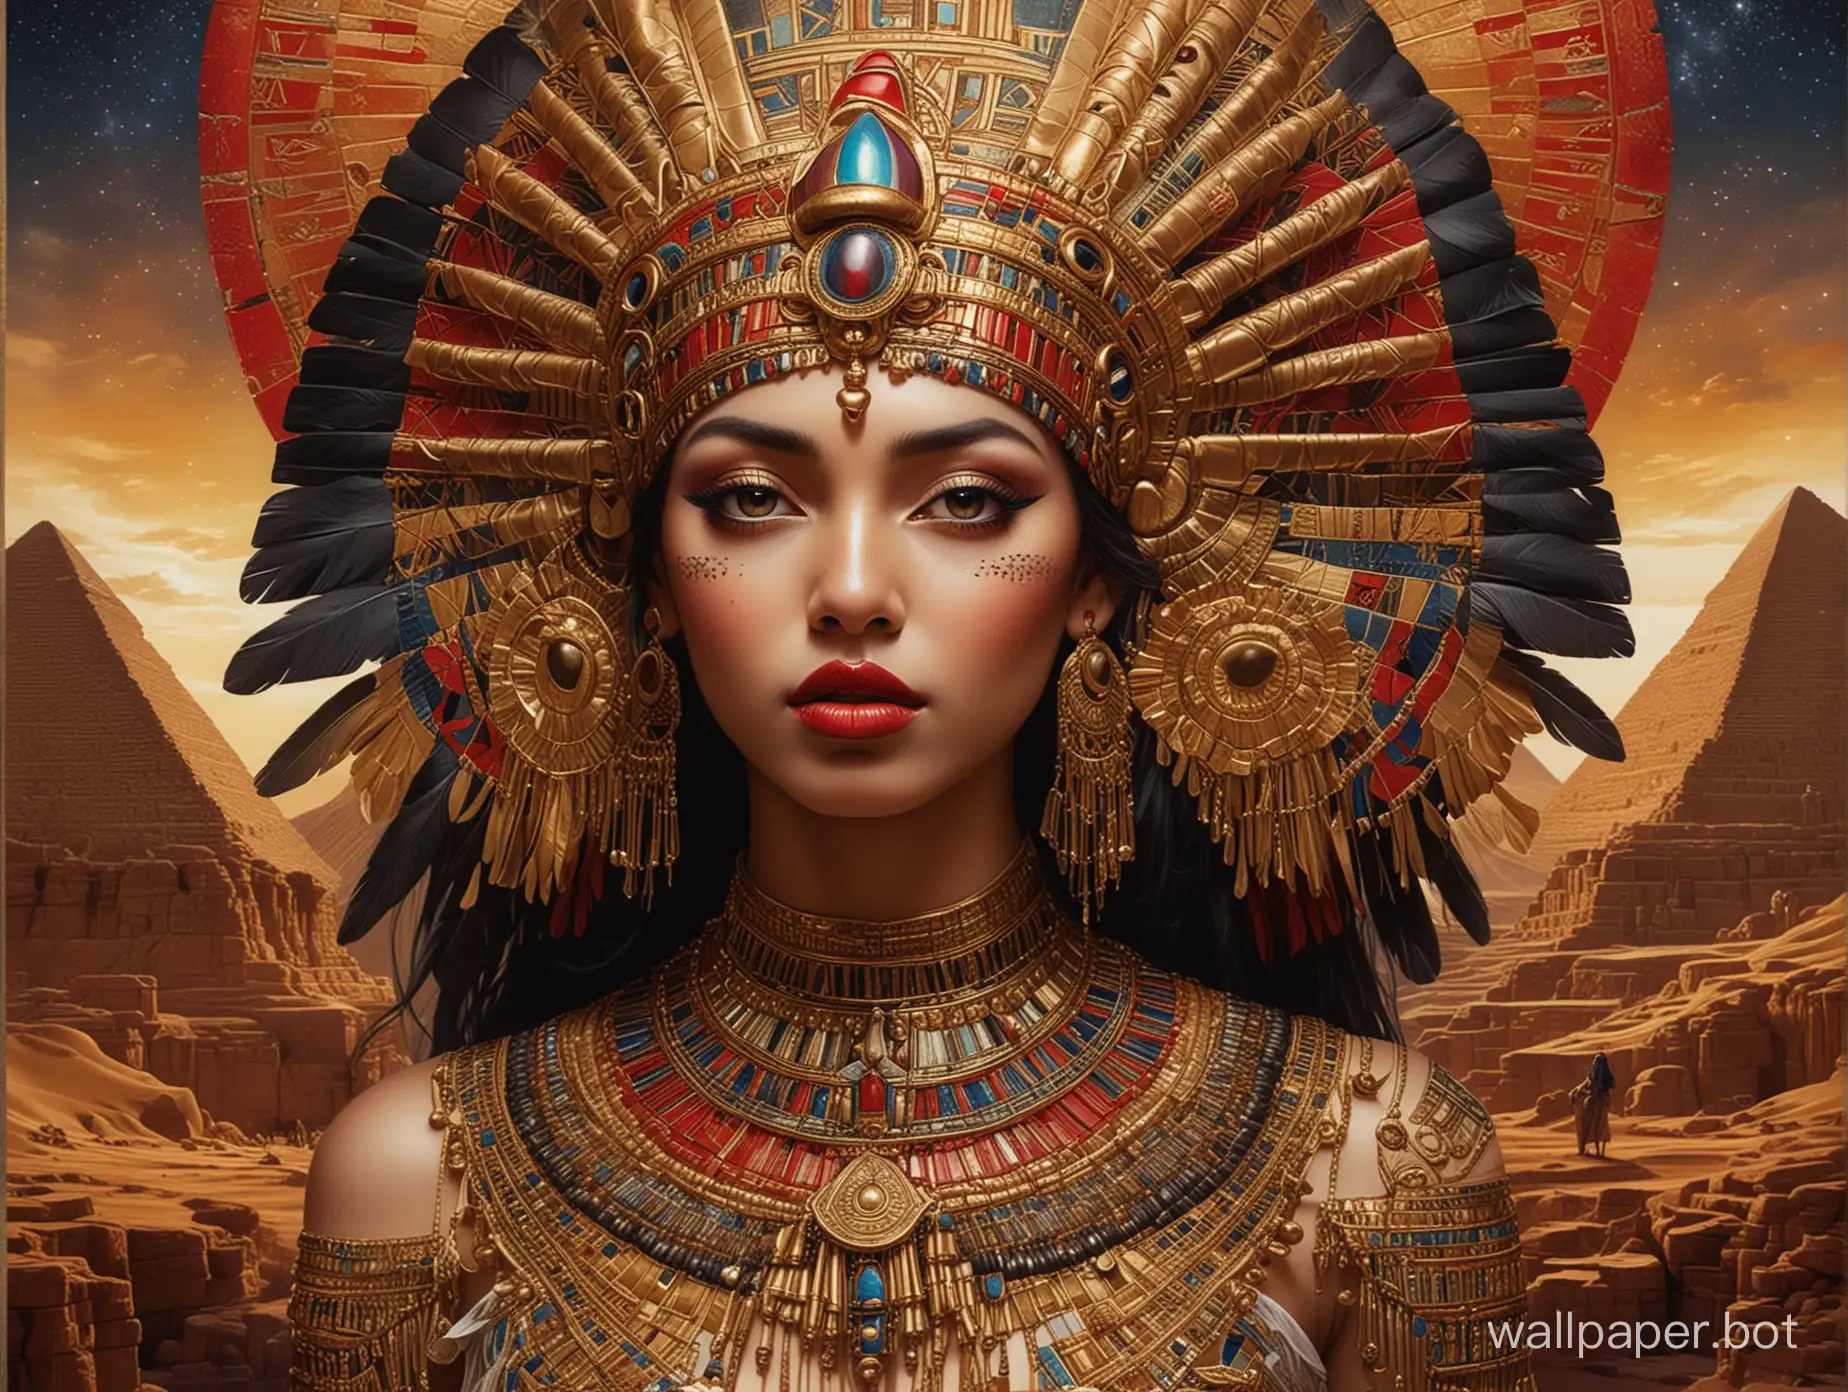 Majestic-Cleopatra-in-Dreamy-Celestial-and-Egyptianthemed-Art